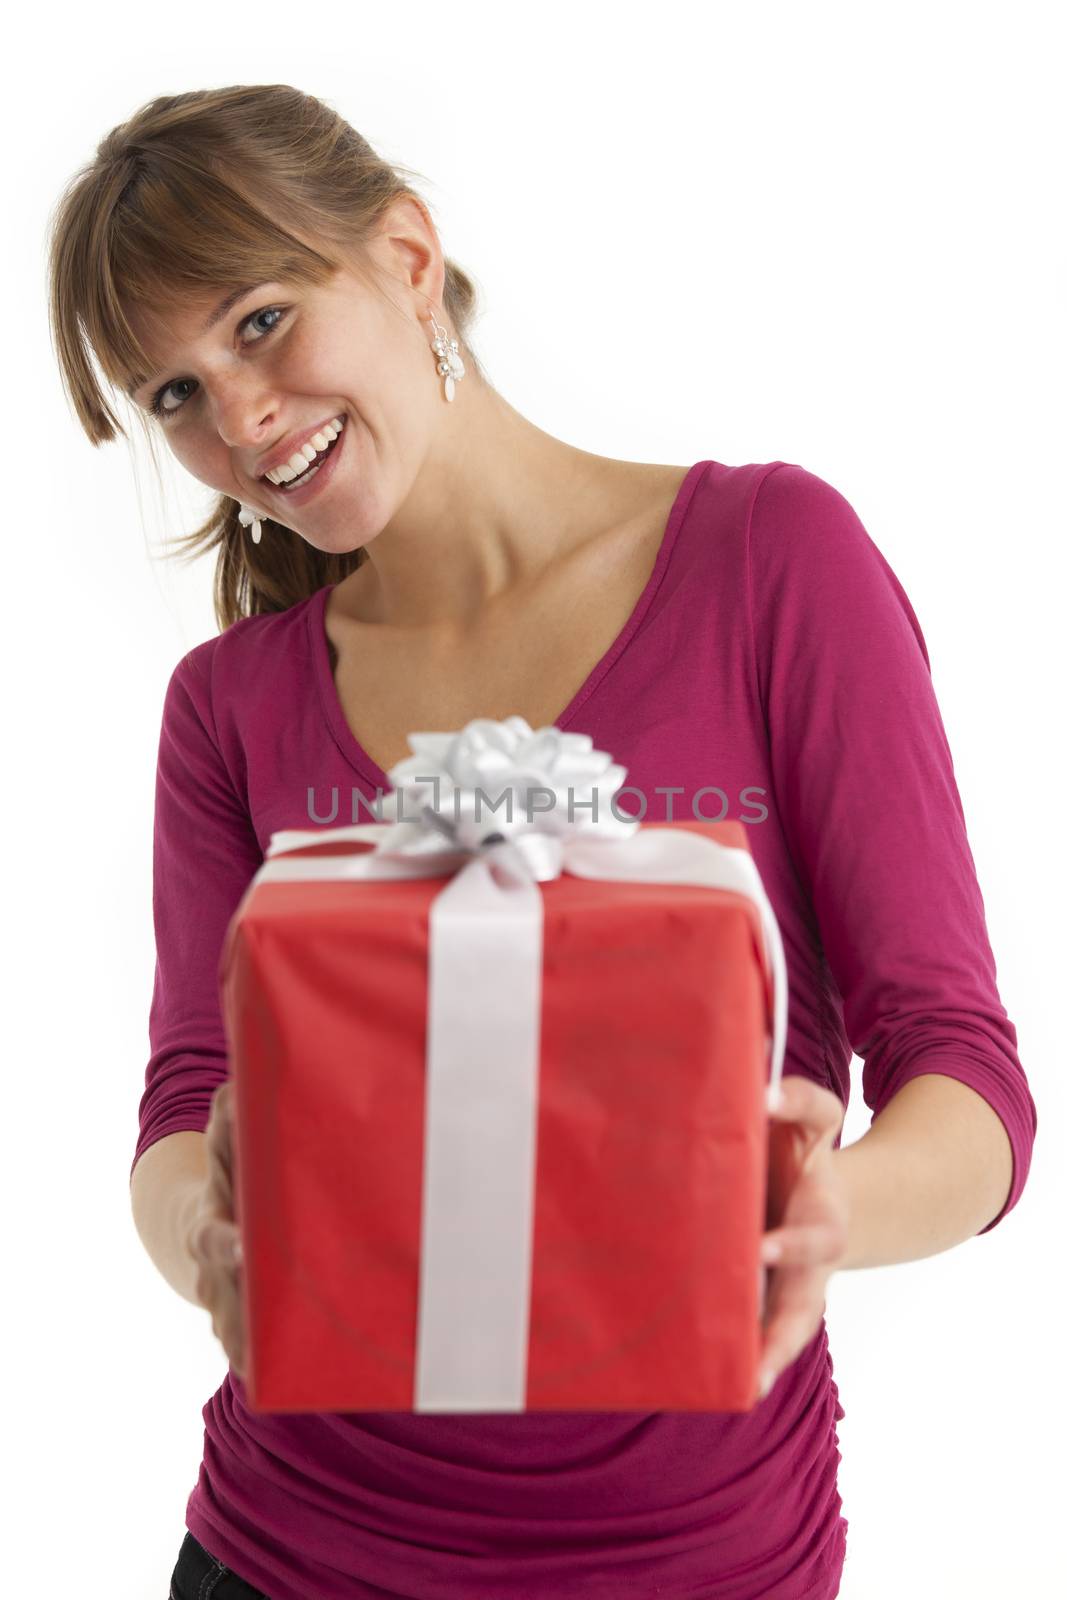 young woman with a gift